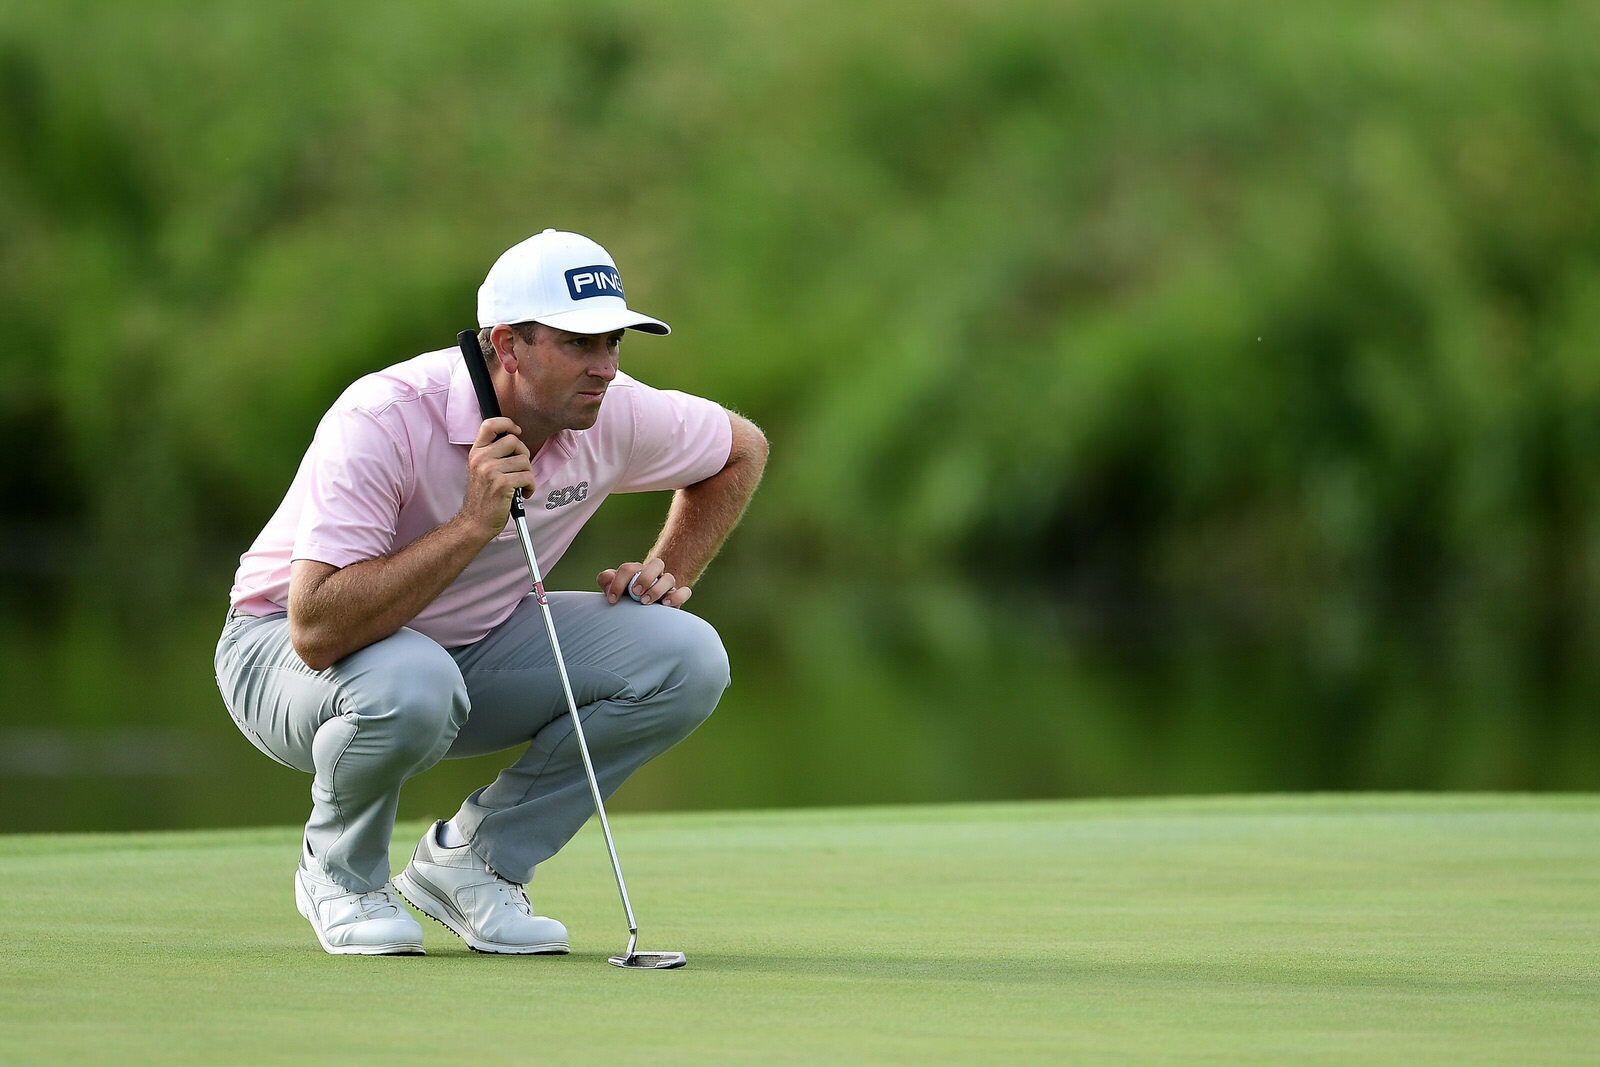  BLAINE, MINNESOTA - JULY 24: Michael Thompson of the United States looks over a putt on the sixth green during the second round of the 3M Open on July 24, 2020 at TPC Twin Cities in Blaine, Minnesota. (Photo by Stacy Revere/Getty Images) 